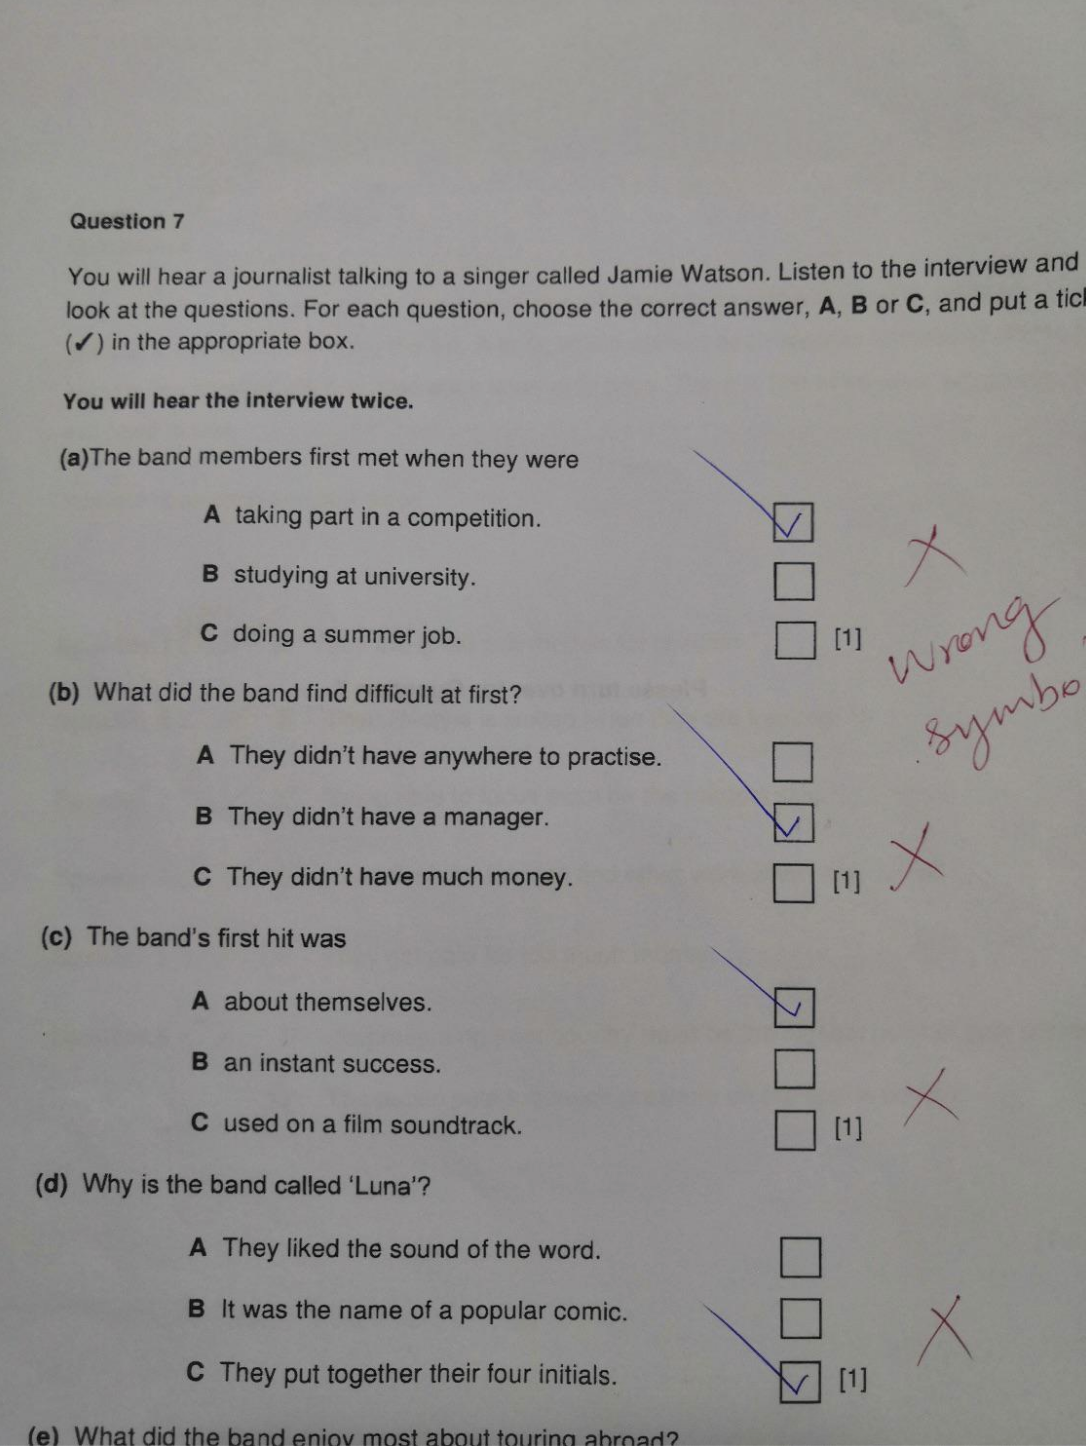 Teacher says it&#x27;s the &quot;wrong symbol&quot; and marks those responses with an x